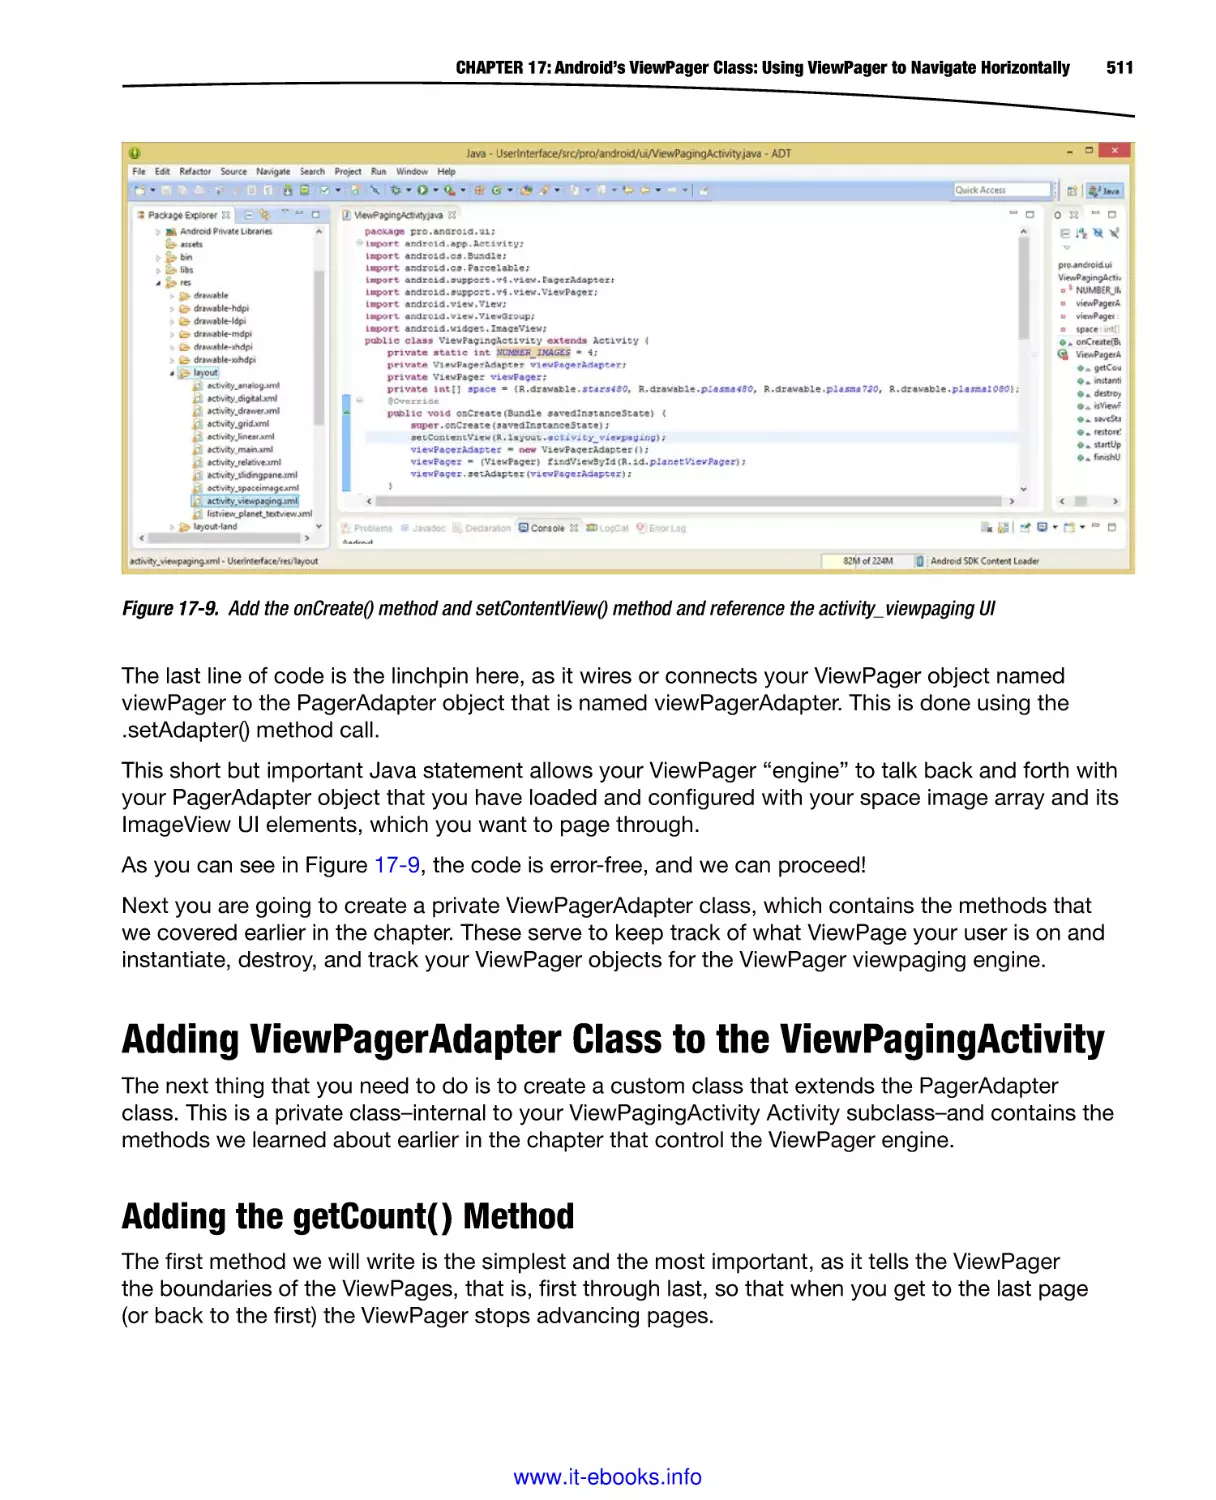 Adding ViewPagerAdapter Class to the ViewPagingActivity
Adding the getCount( ) Method